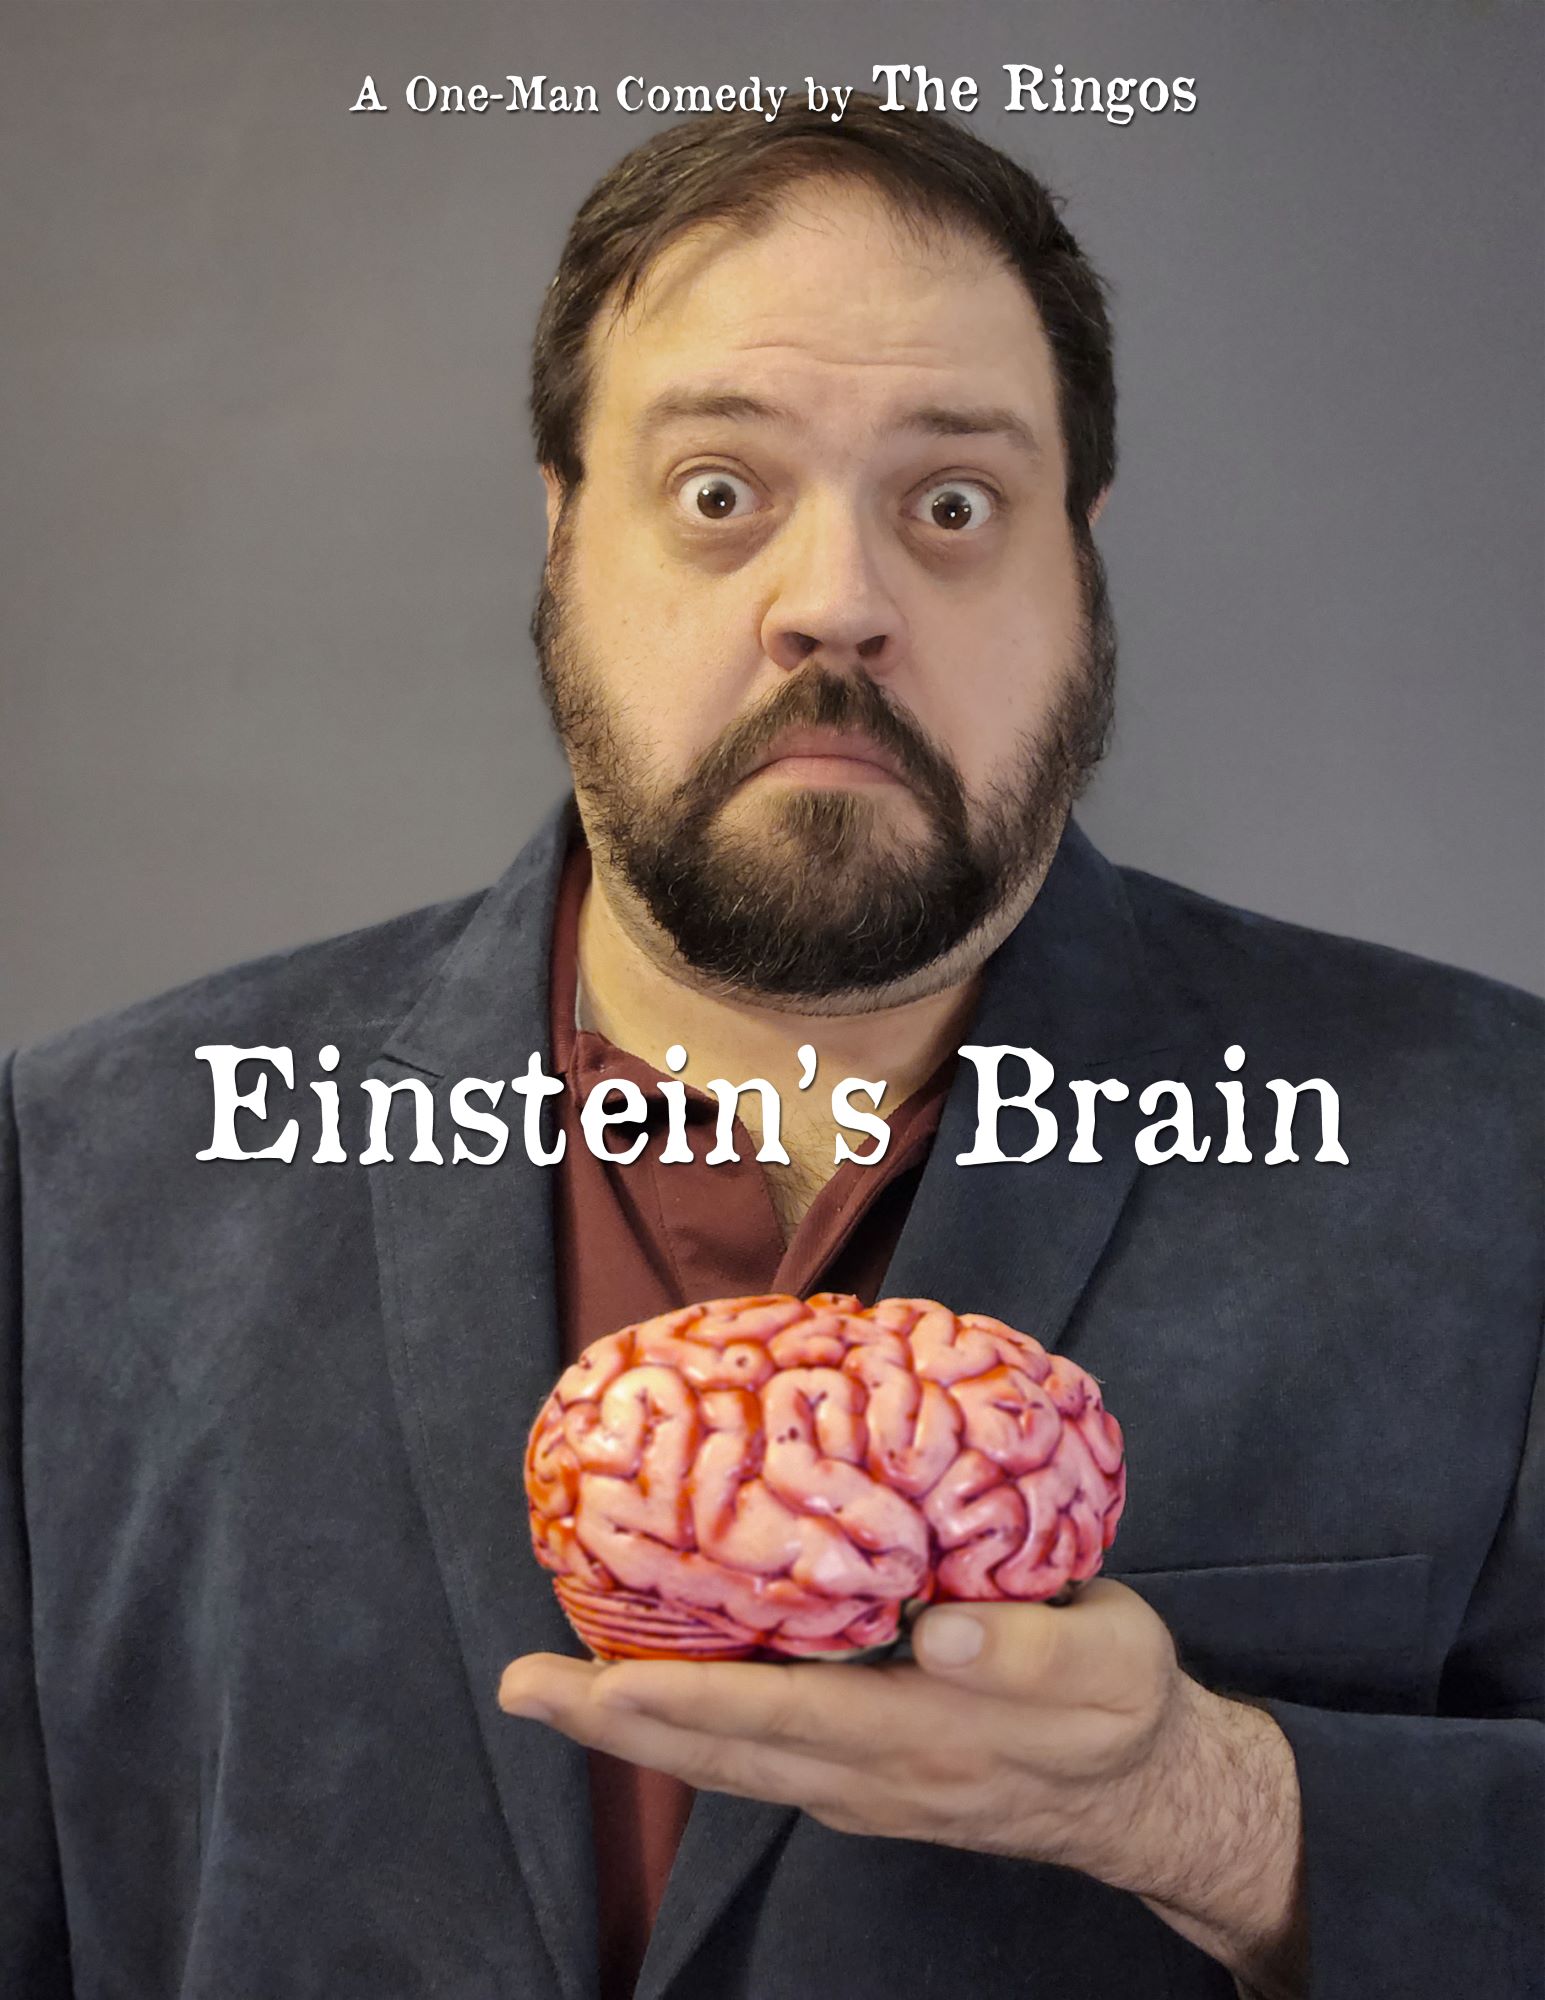 Poster for "Einstein's Brain" presented by The Ringos.